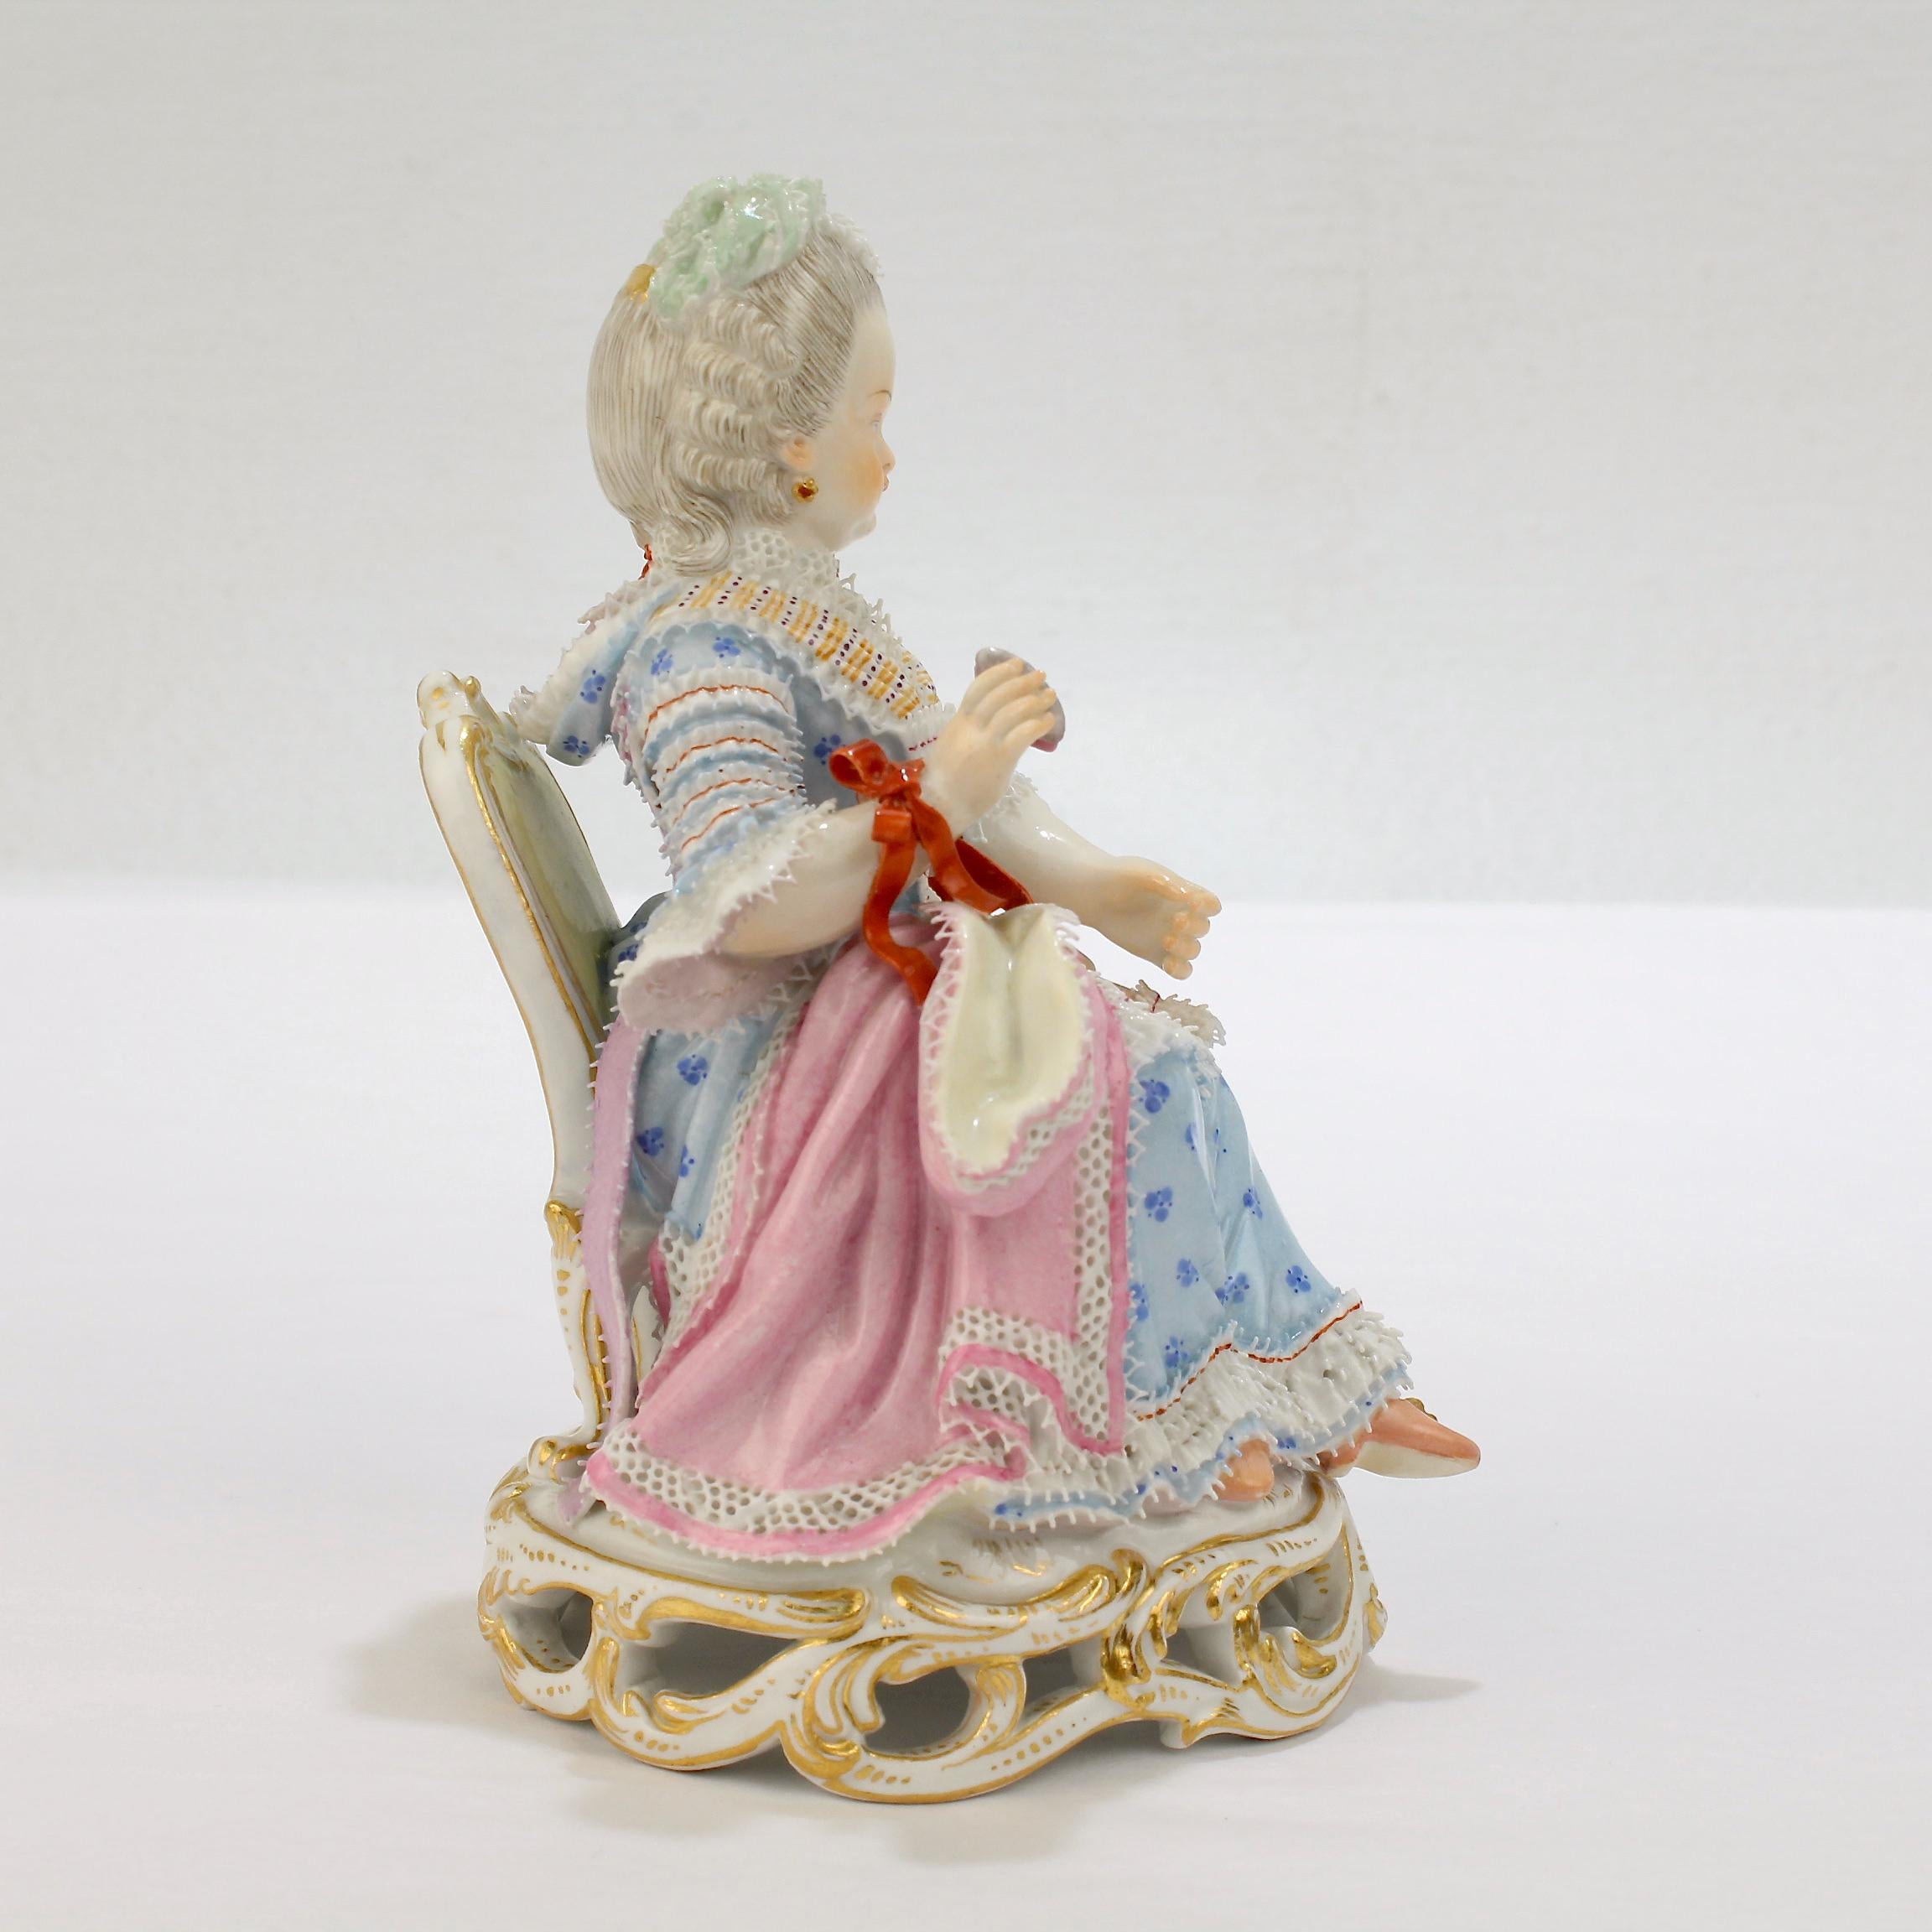 Rococo Antique Meissen Porcelain Figurine of a Girl with a Thread Winder Model No. C 28